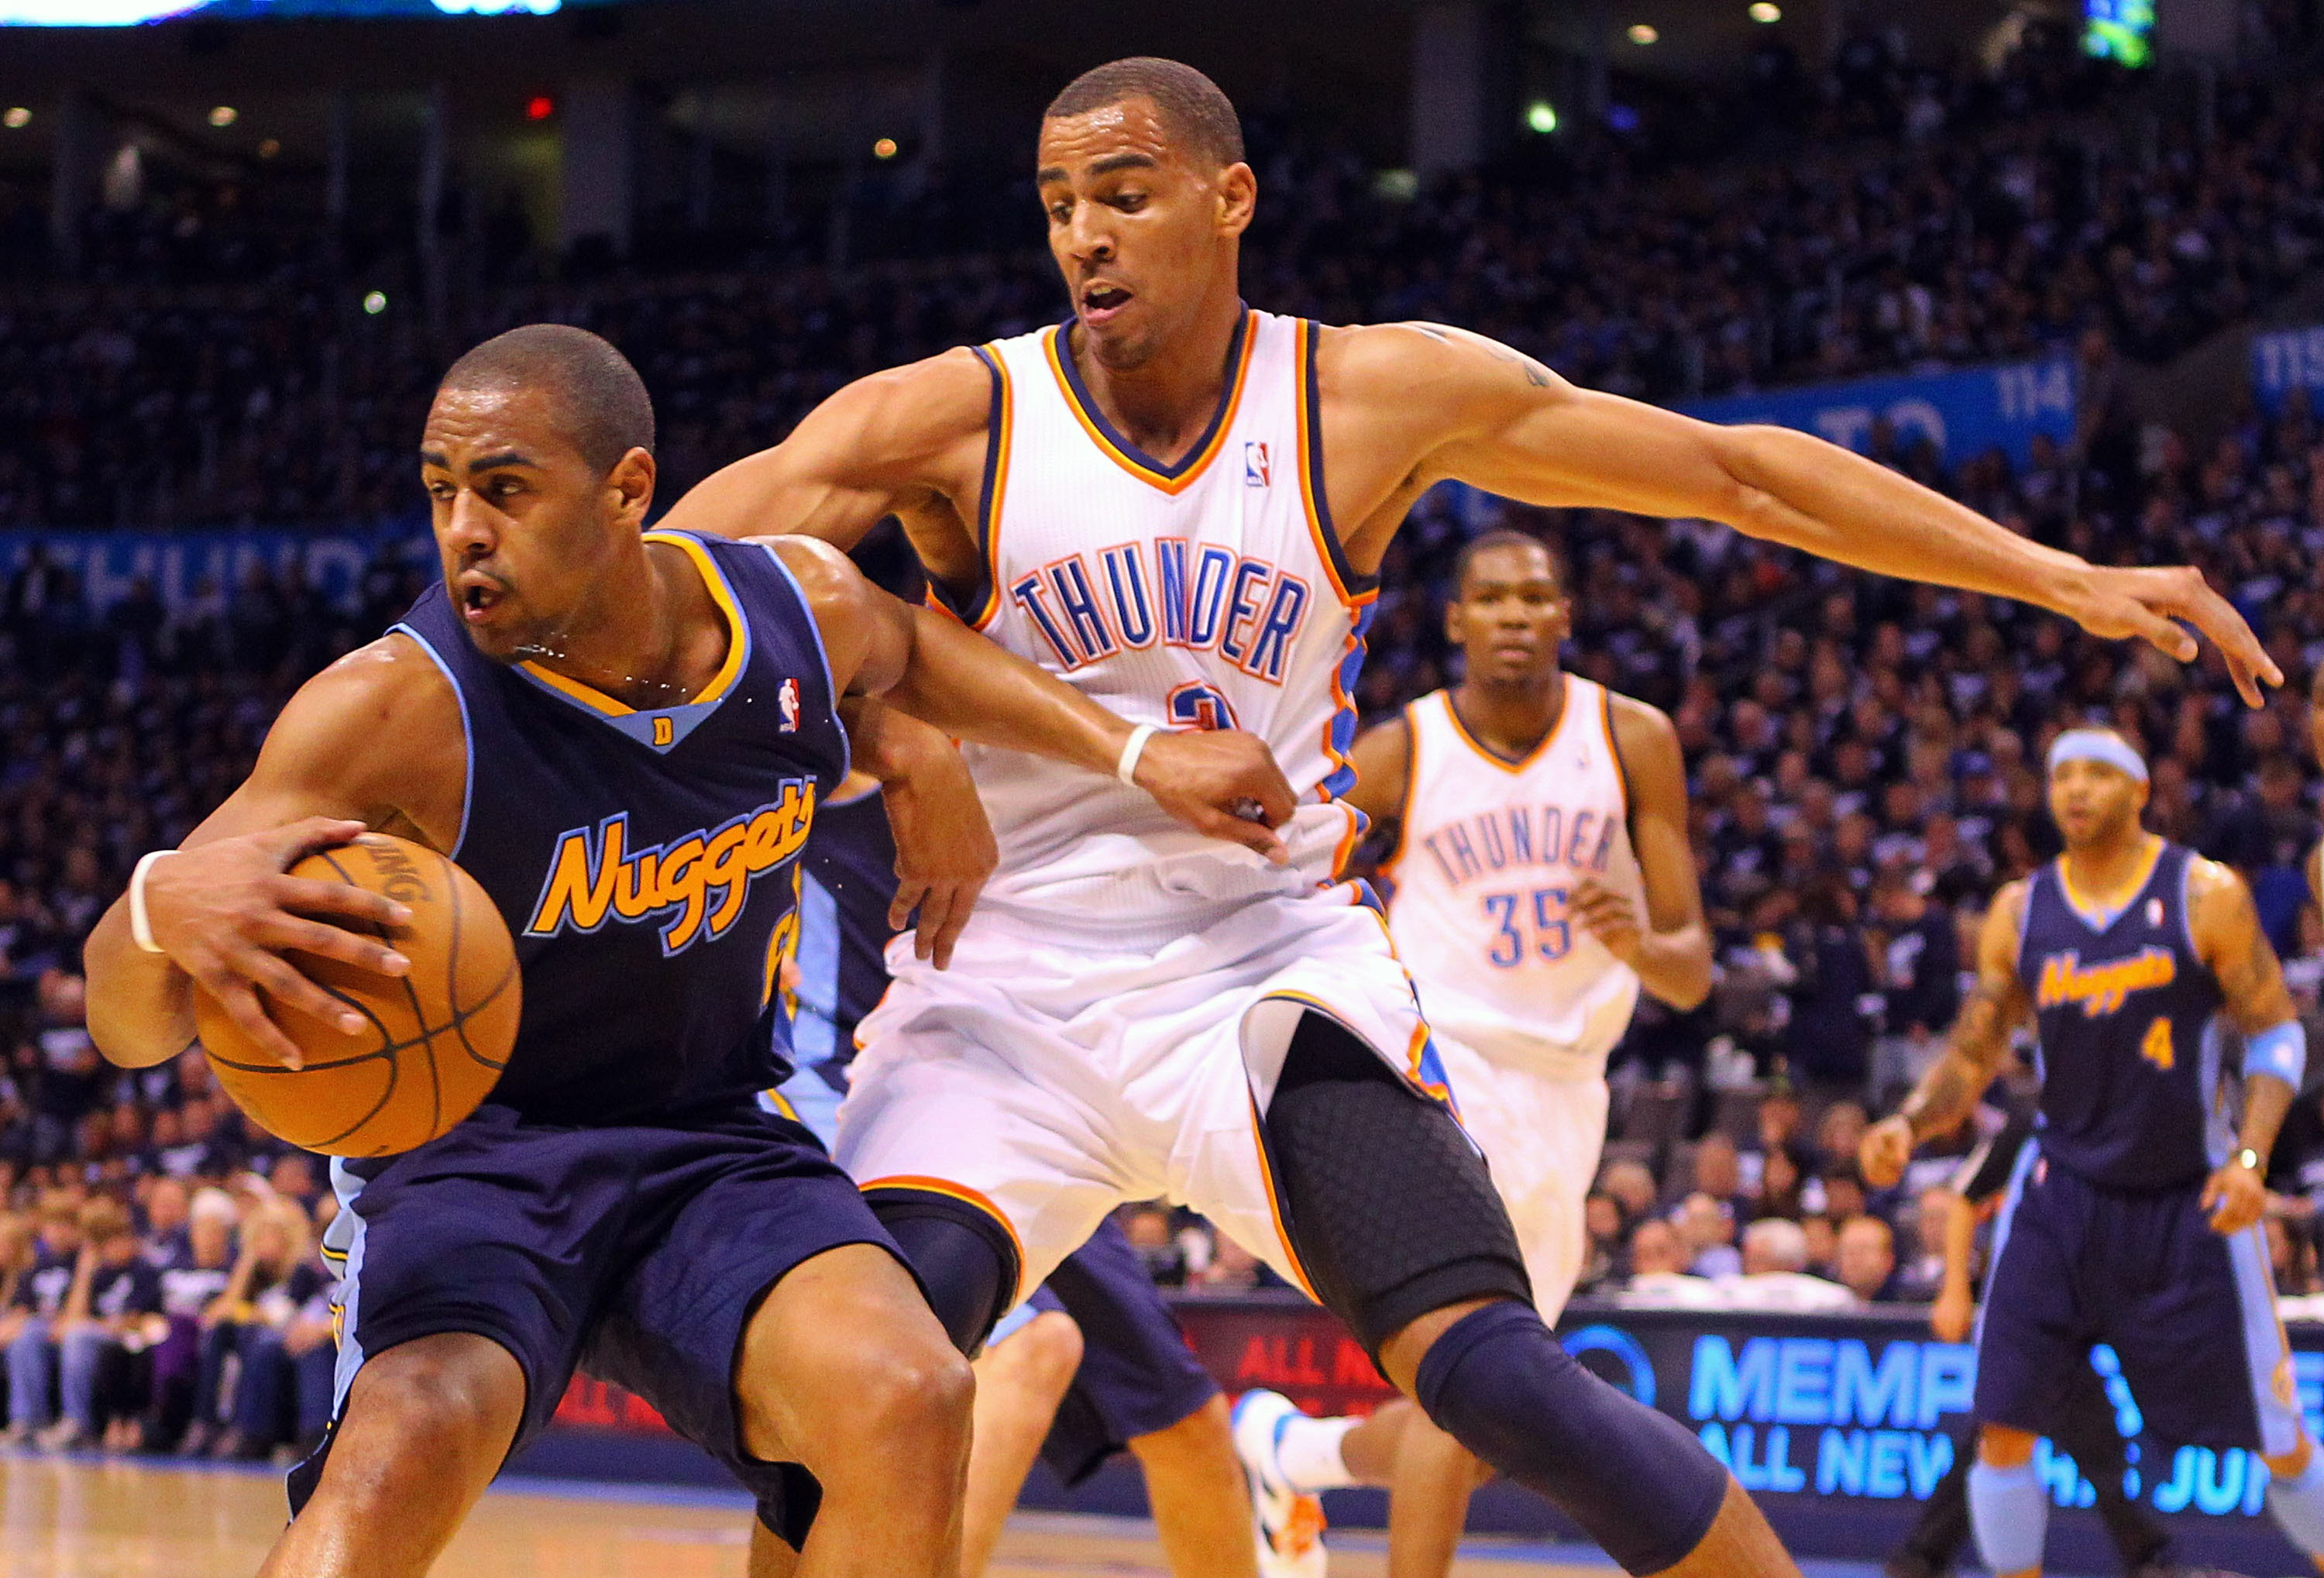 Andre Iguodala Needs Denver Nuggets as Much as They Need Him